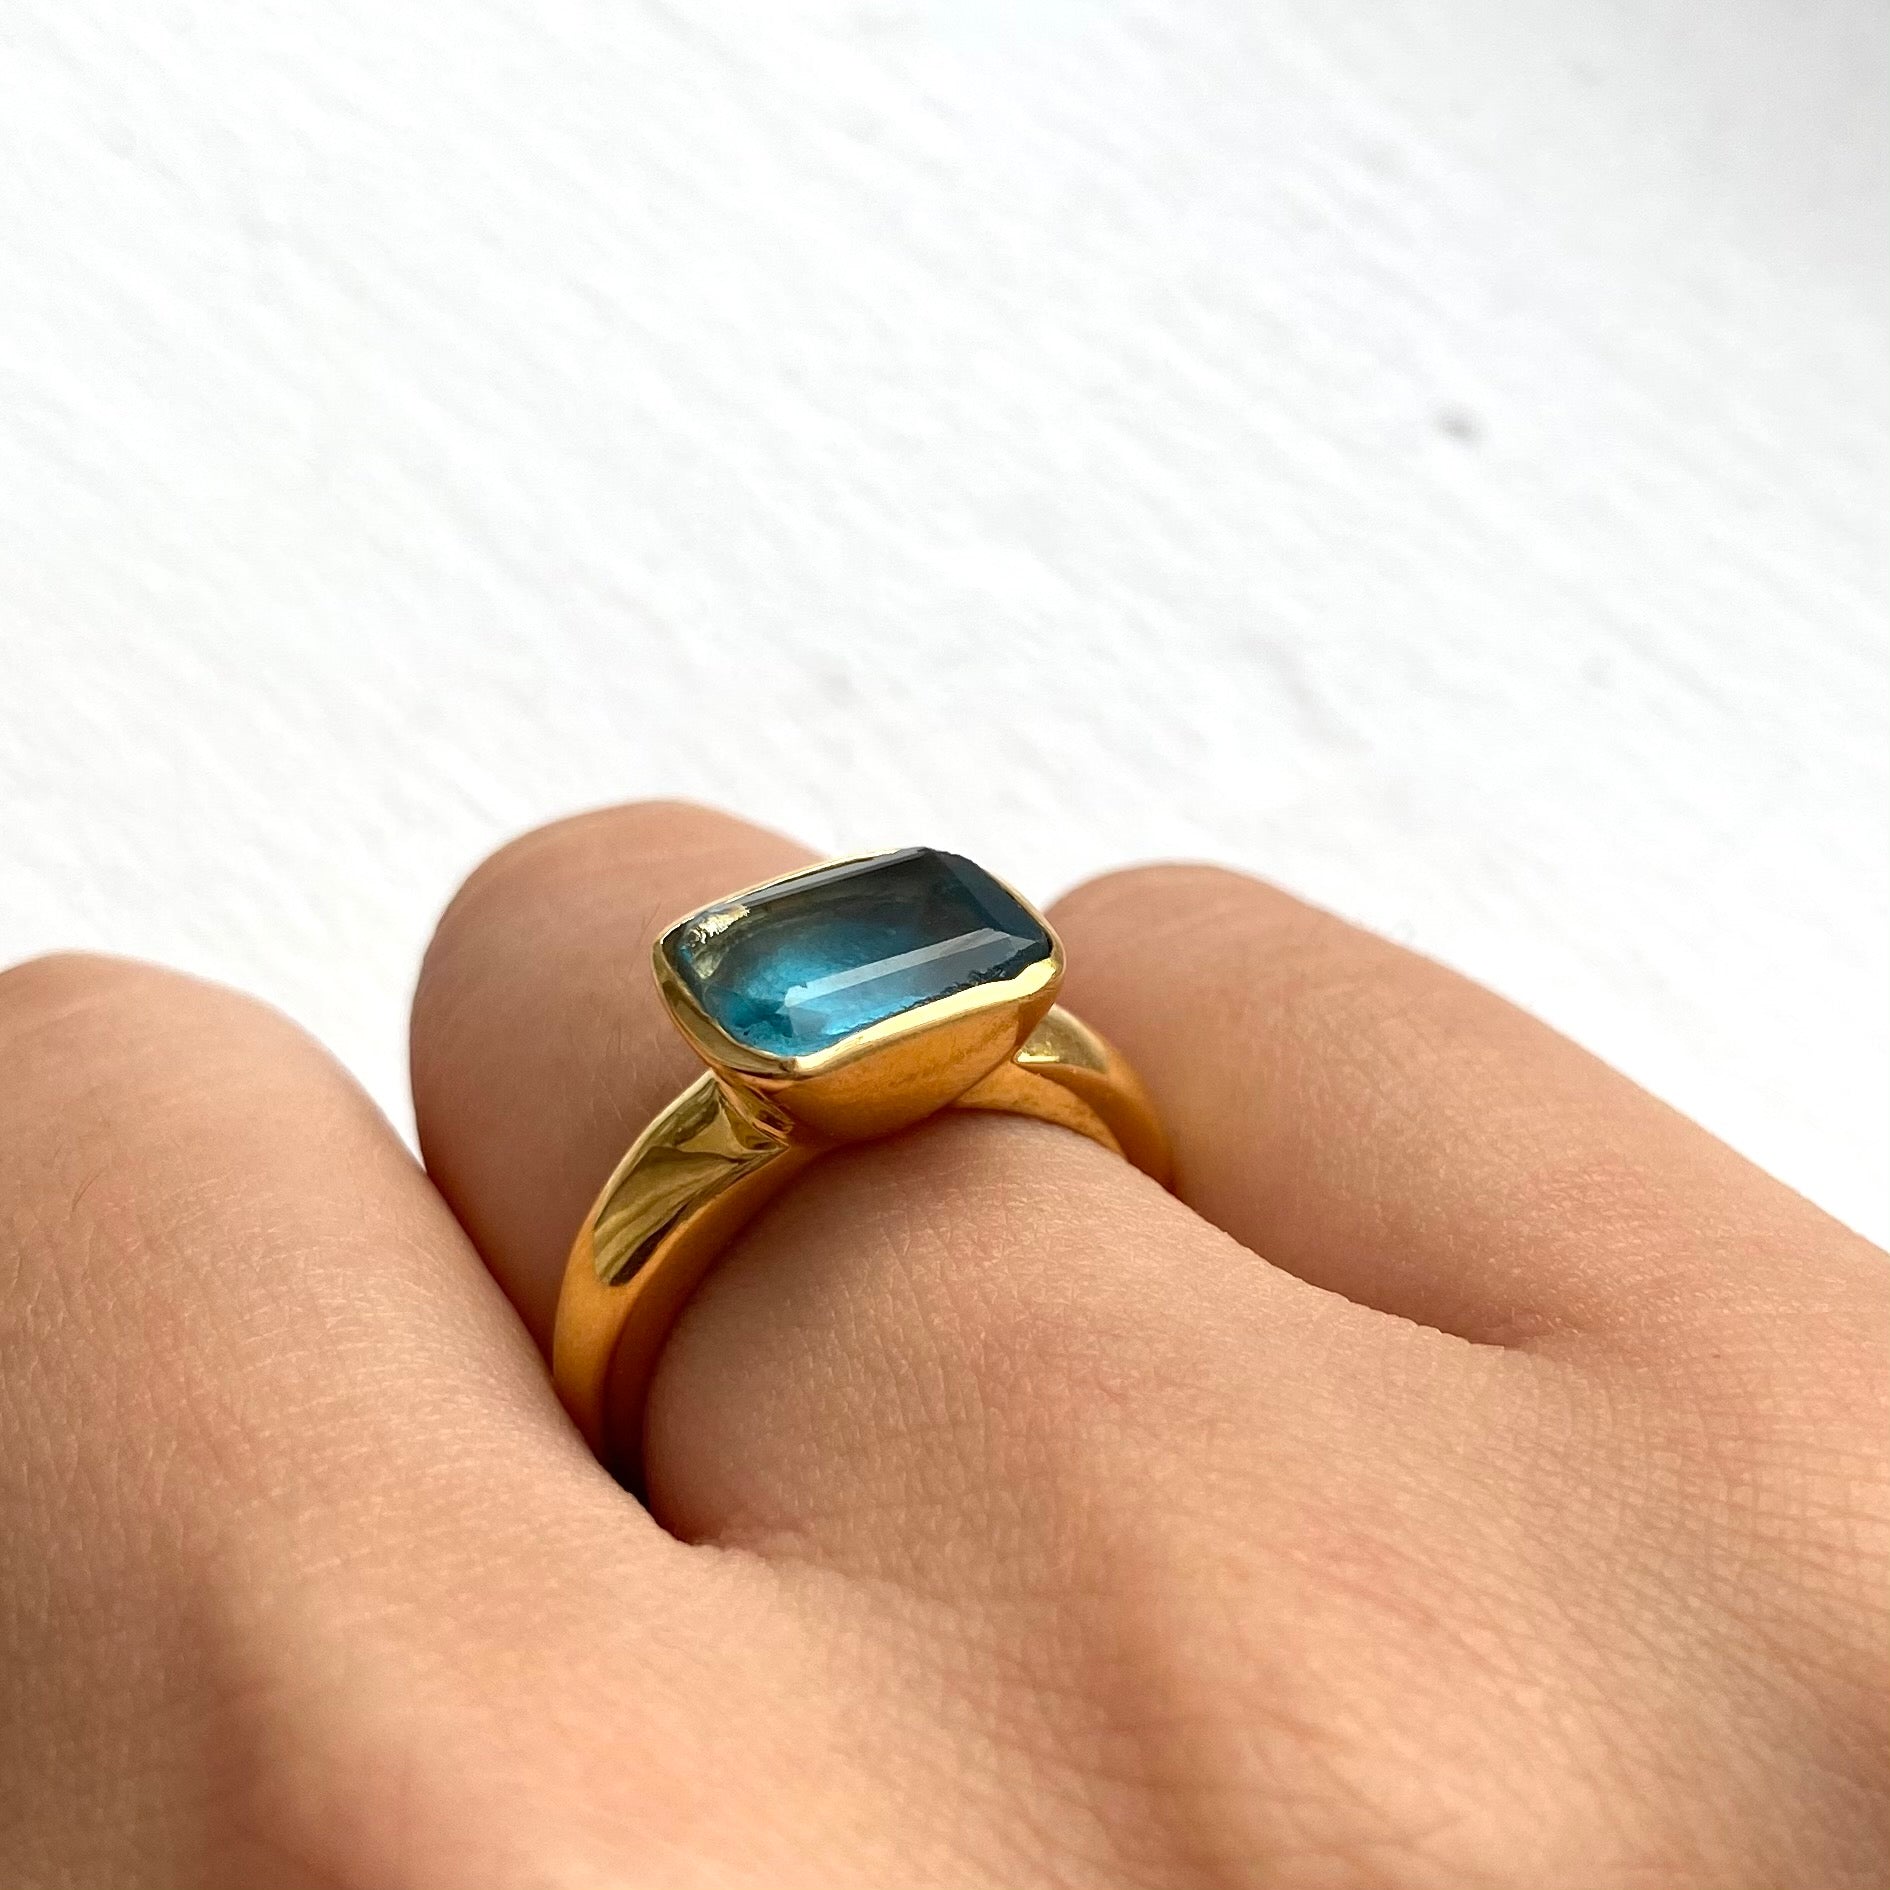 Faceted Rectangular Cut Natural Gemstone Gold Plated Sterling Silver Ring - Apatite